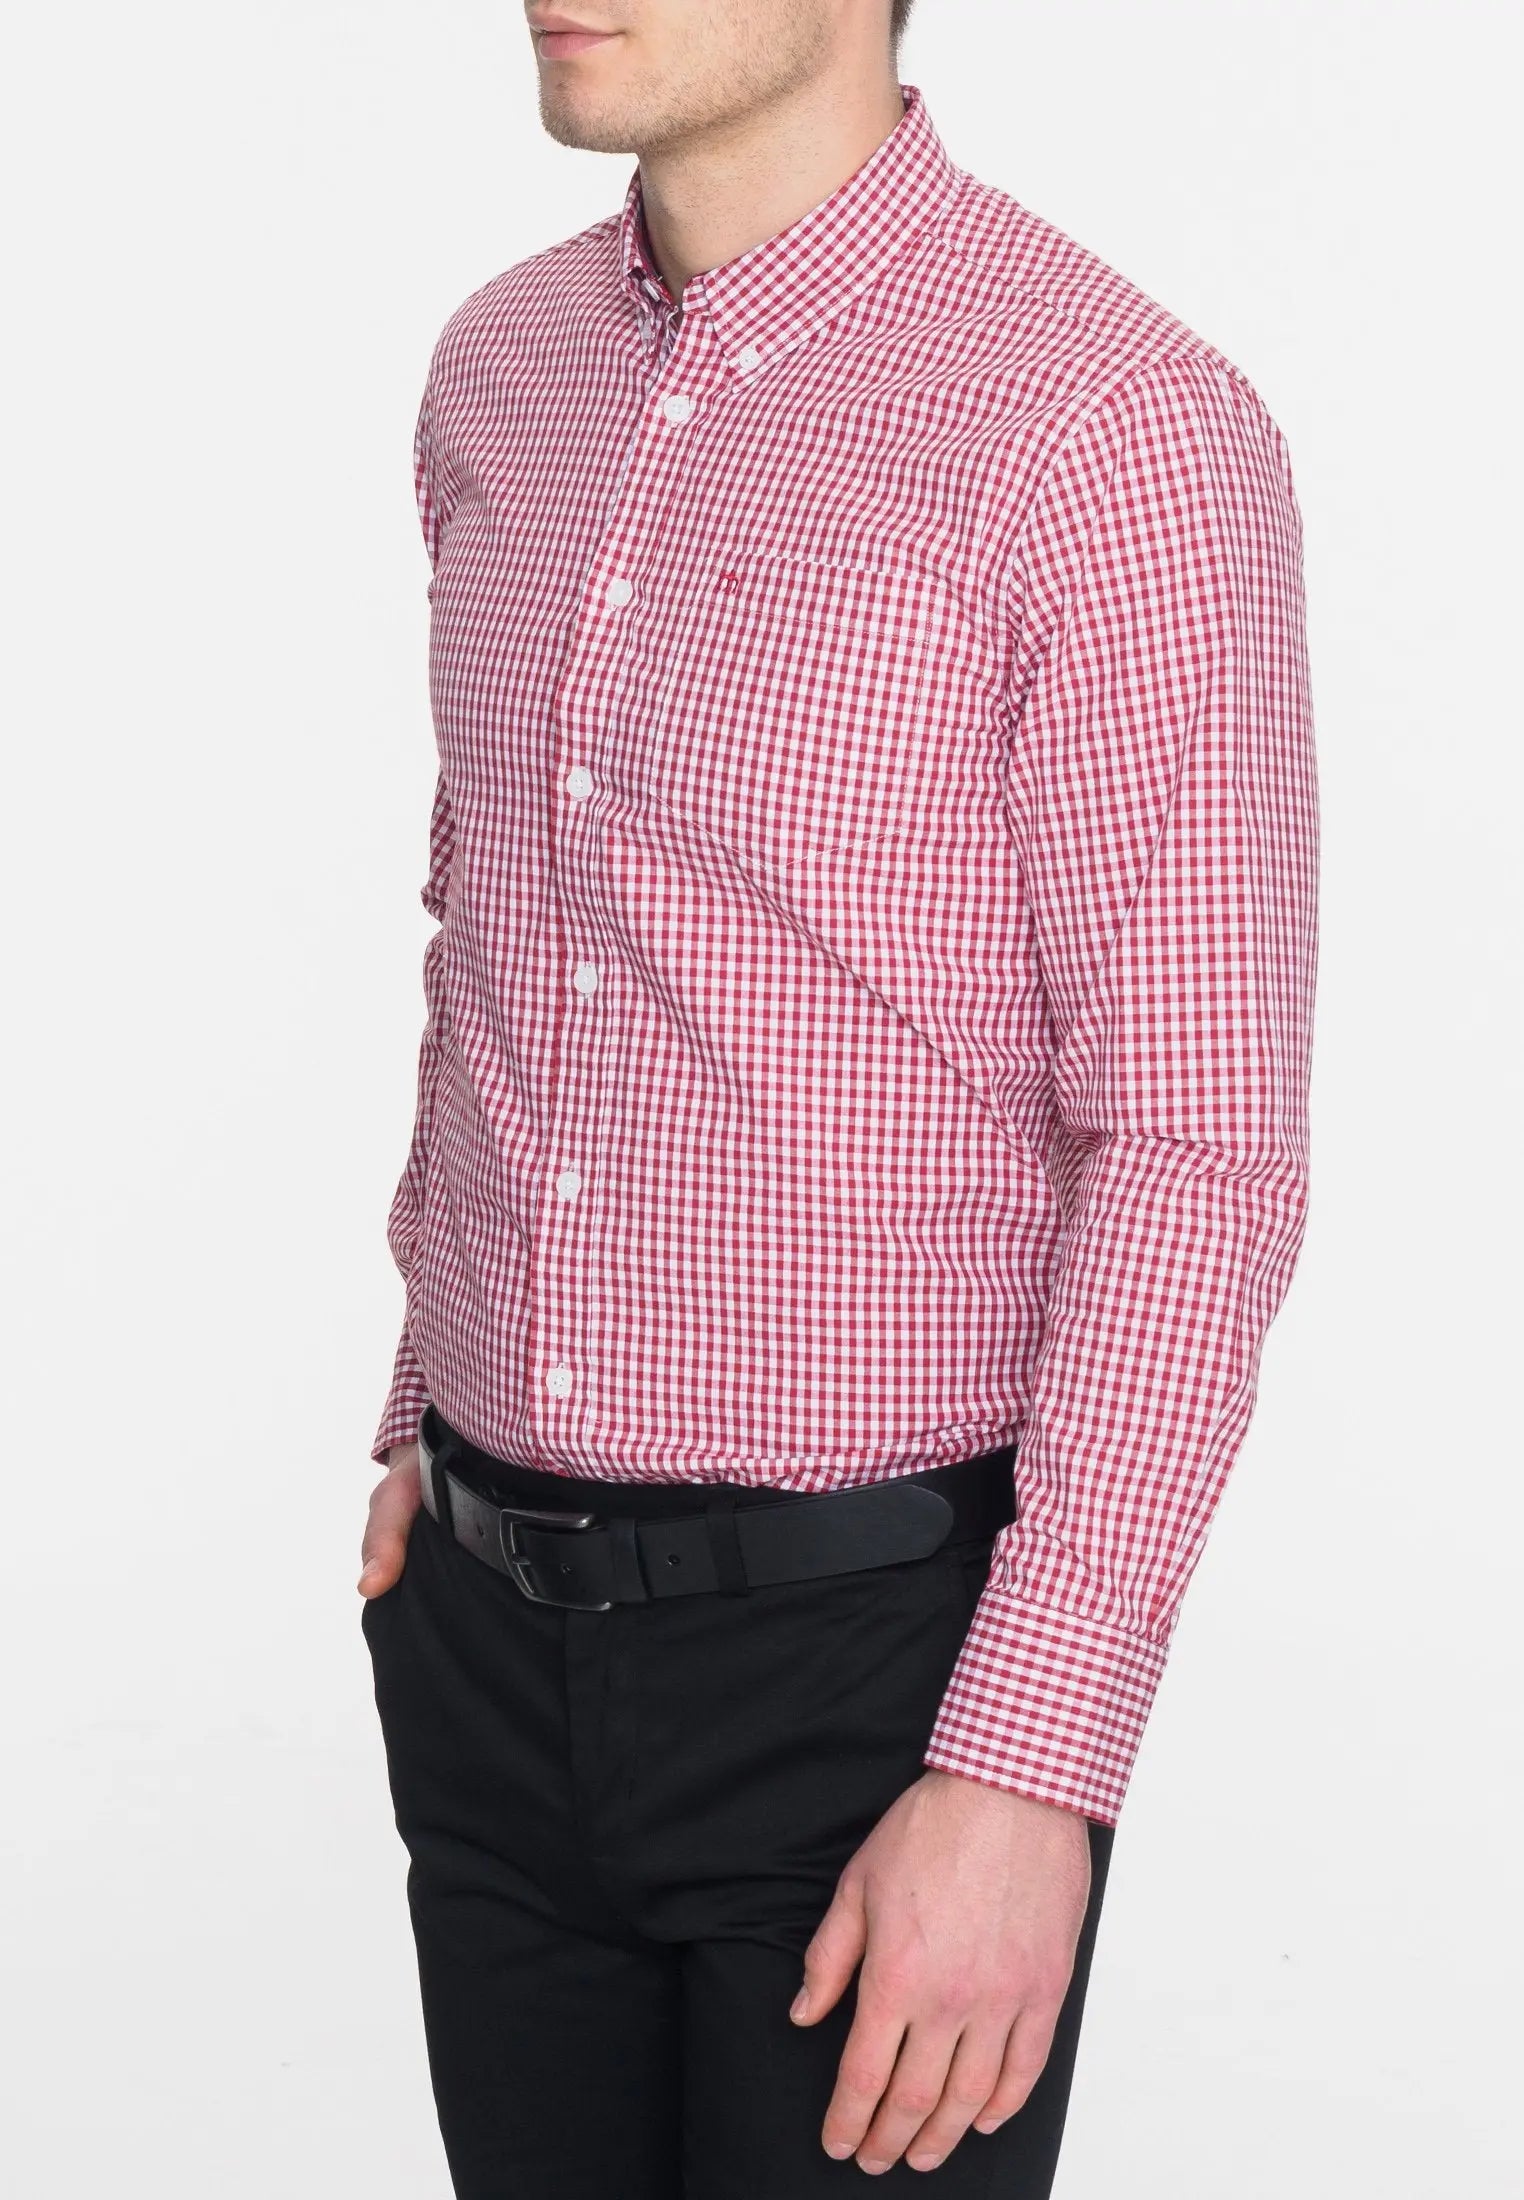 Merc London Japster Gingham Shirt - Red / White From Woven Durham